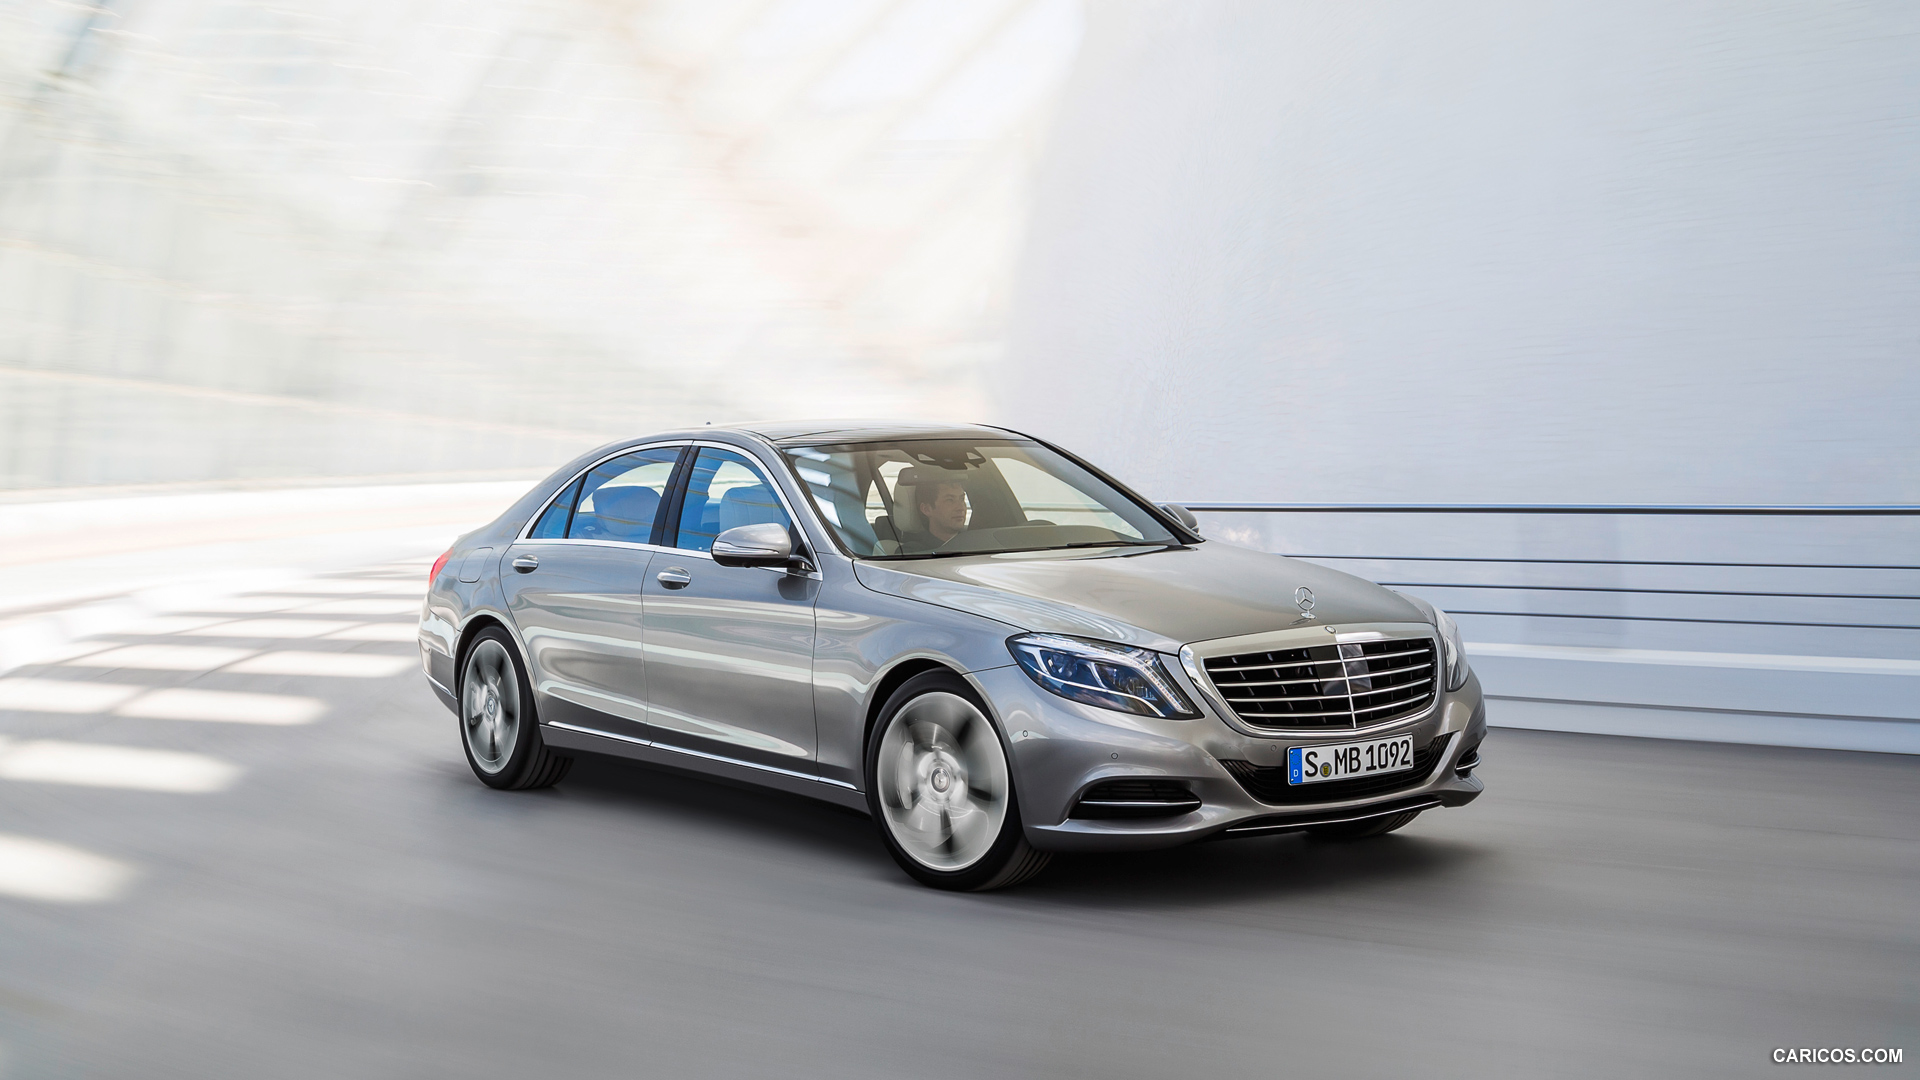 2014 Mercedes-Benz S-Class S400 HYBRID - Front, #2 of 138